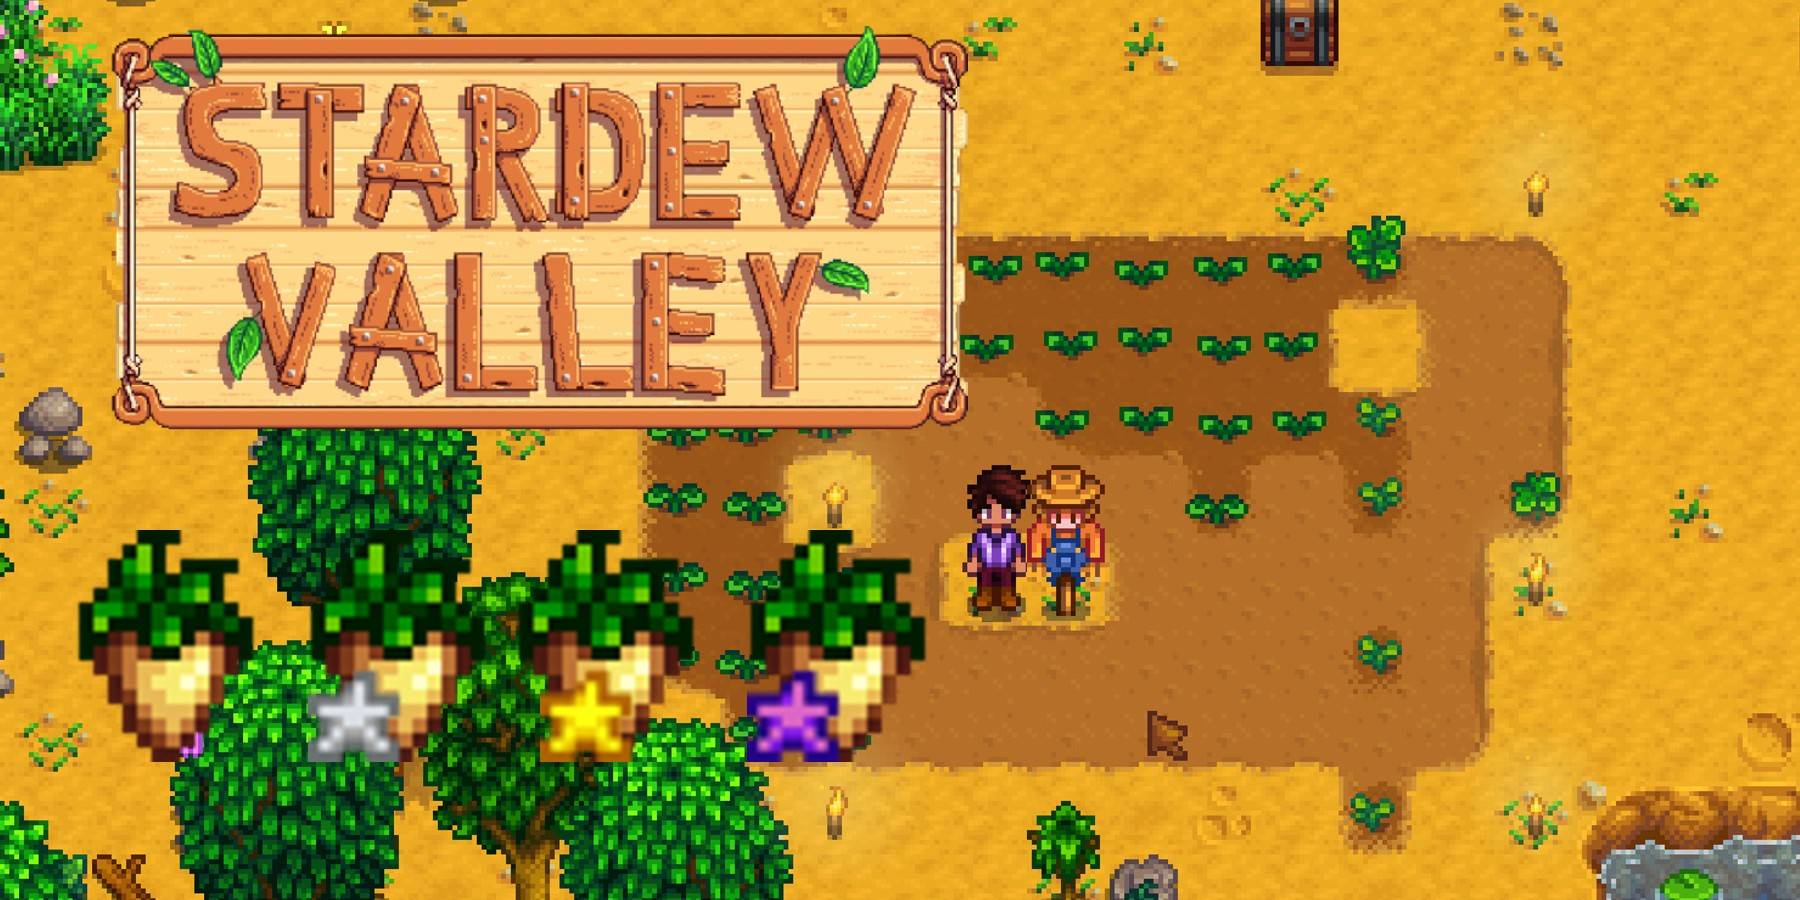 How to get a rainbow shell in stardew valley